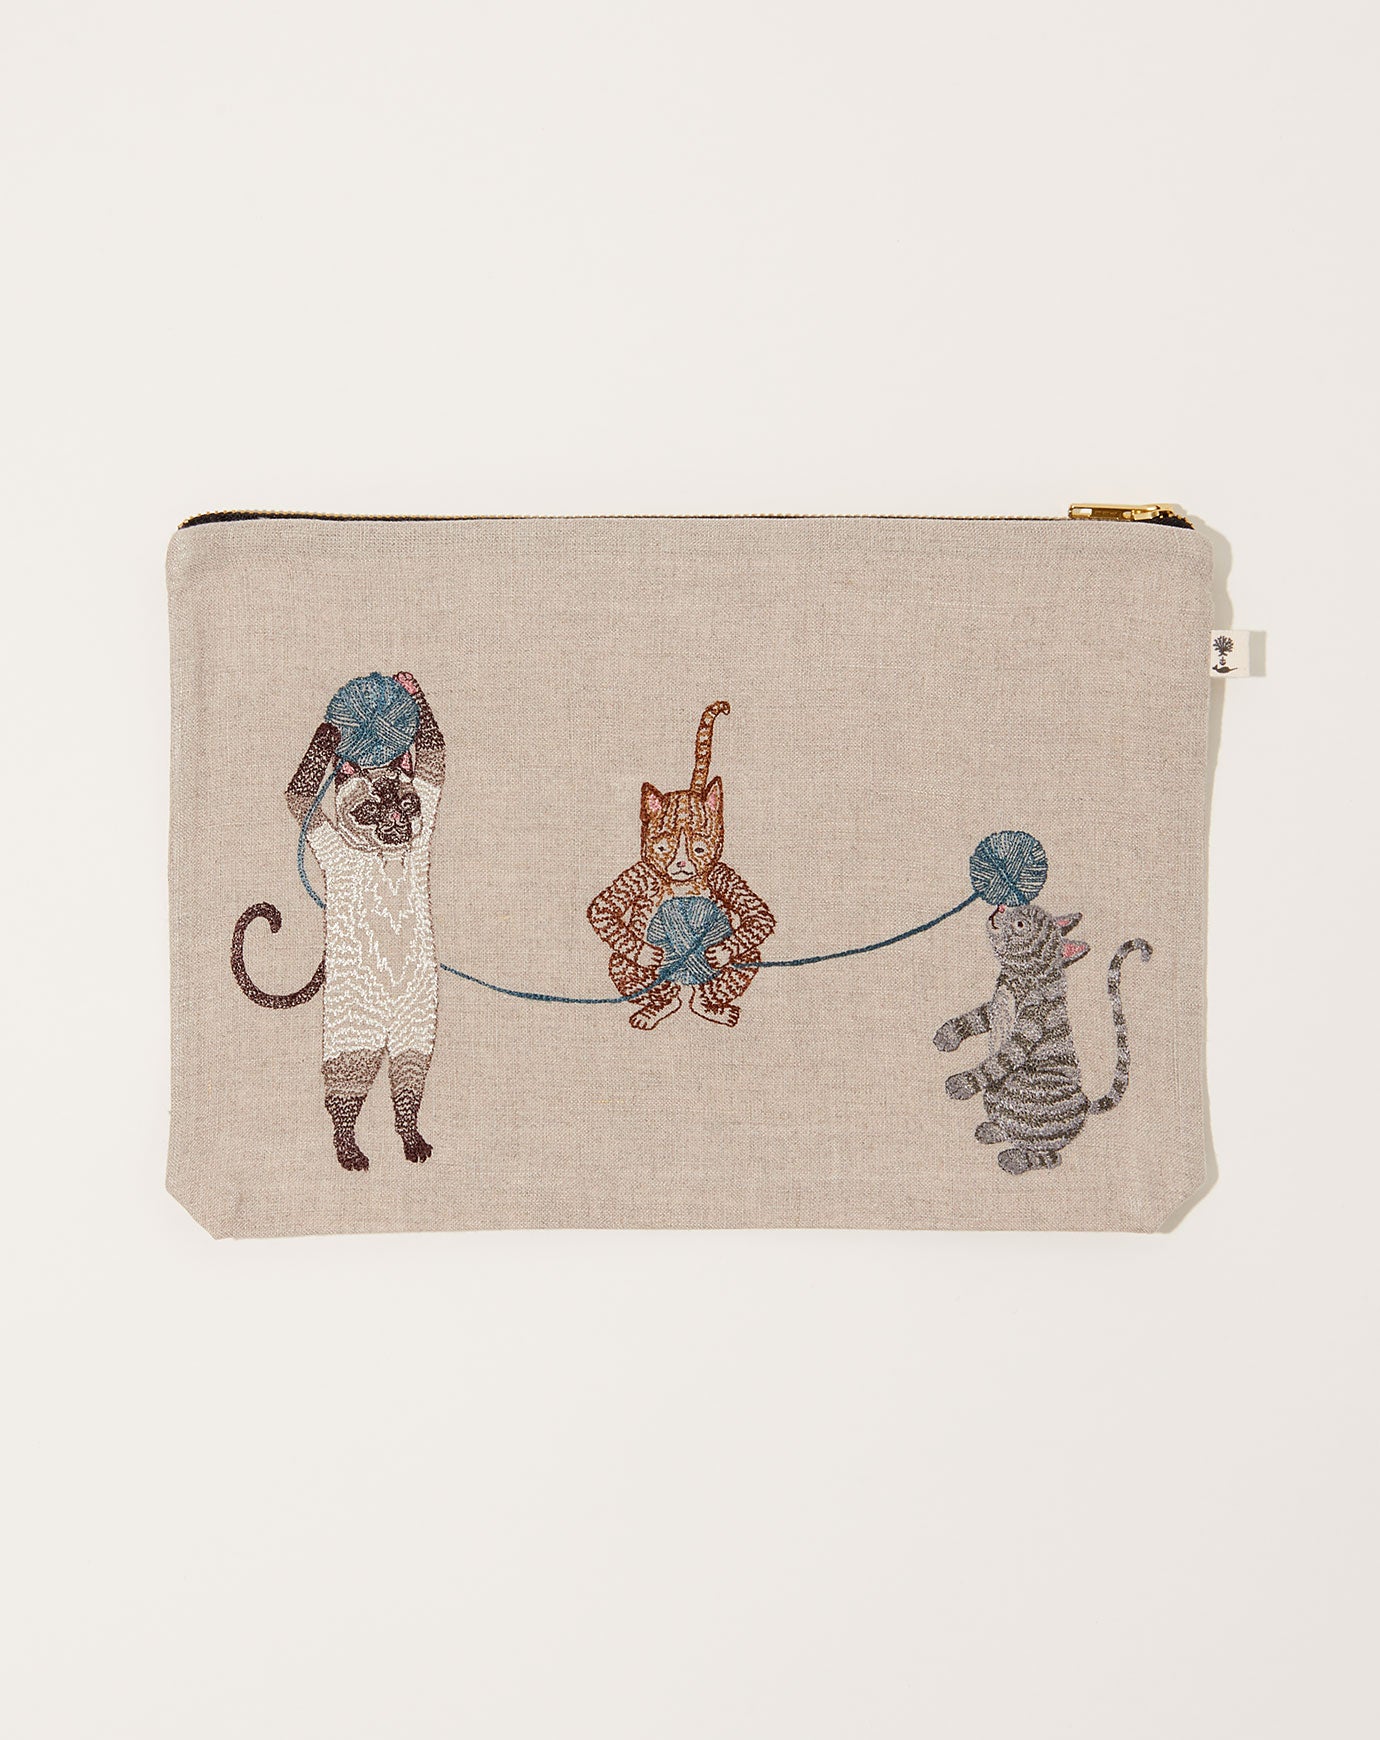 Coral & Tusk Playful Cats Pouch